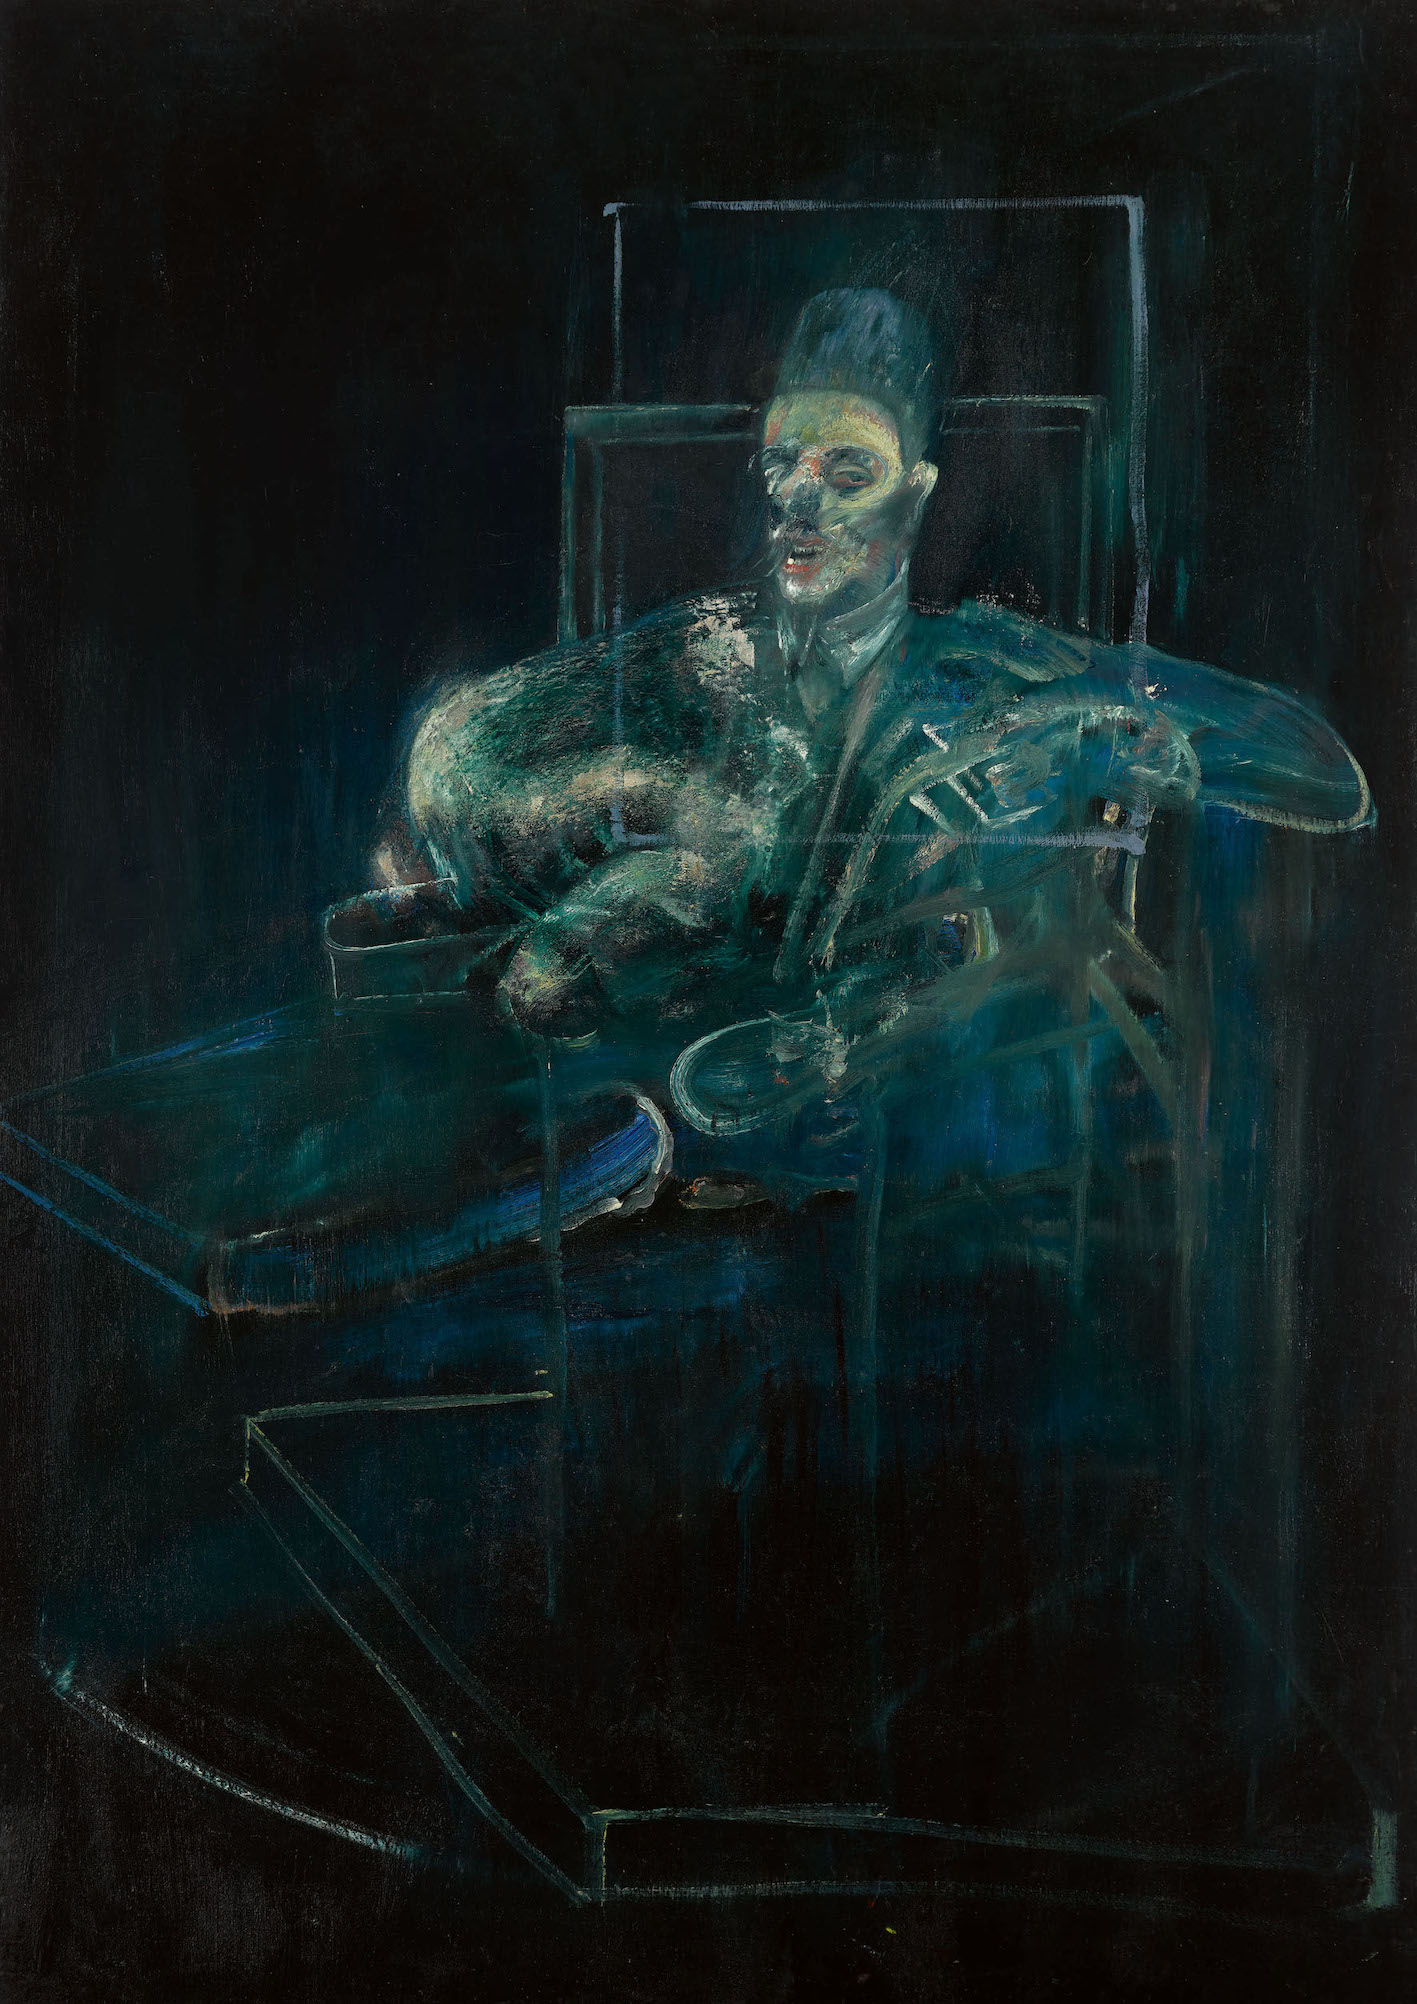 Property from the Brooklyn Museum, Sold to Support Museum Collections Francis Bacon Pope Oil on canvas 77⅛ by 55⅞ in. 195.9 by 141.9 cm. Executed circa 1958. Estimate $6:8 million. Courtesy Sotheby’s